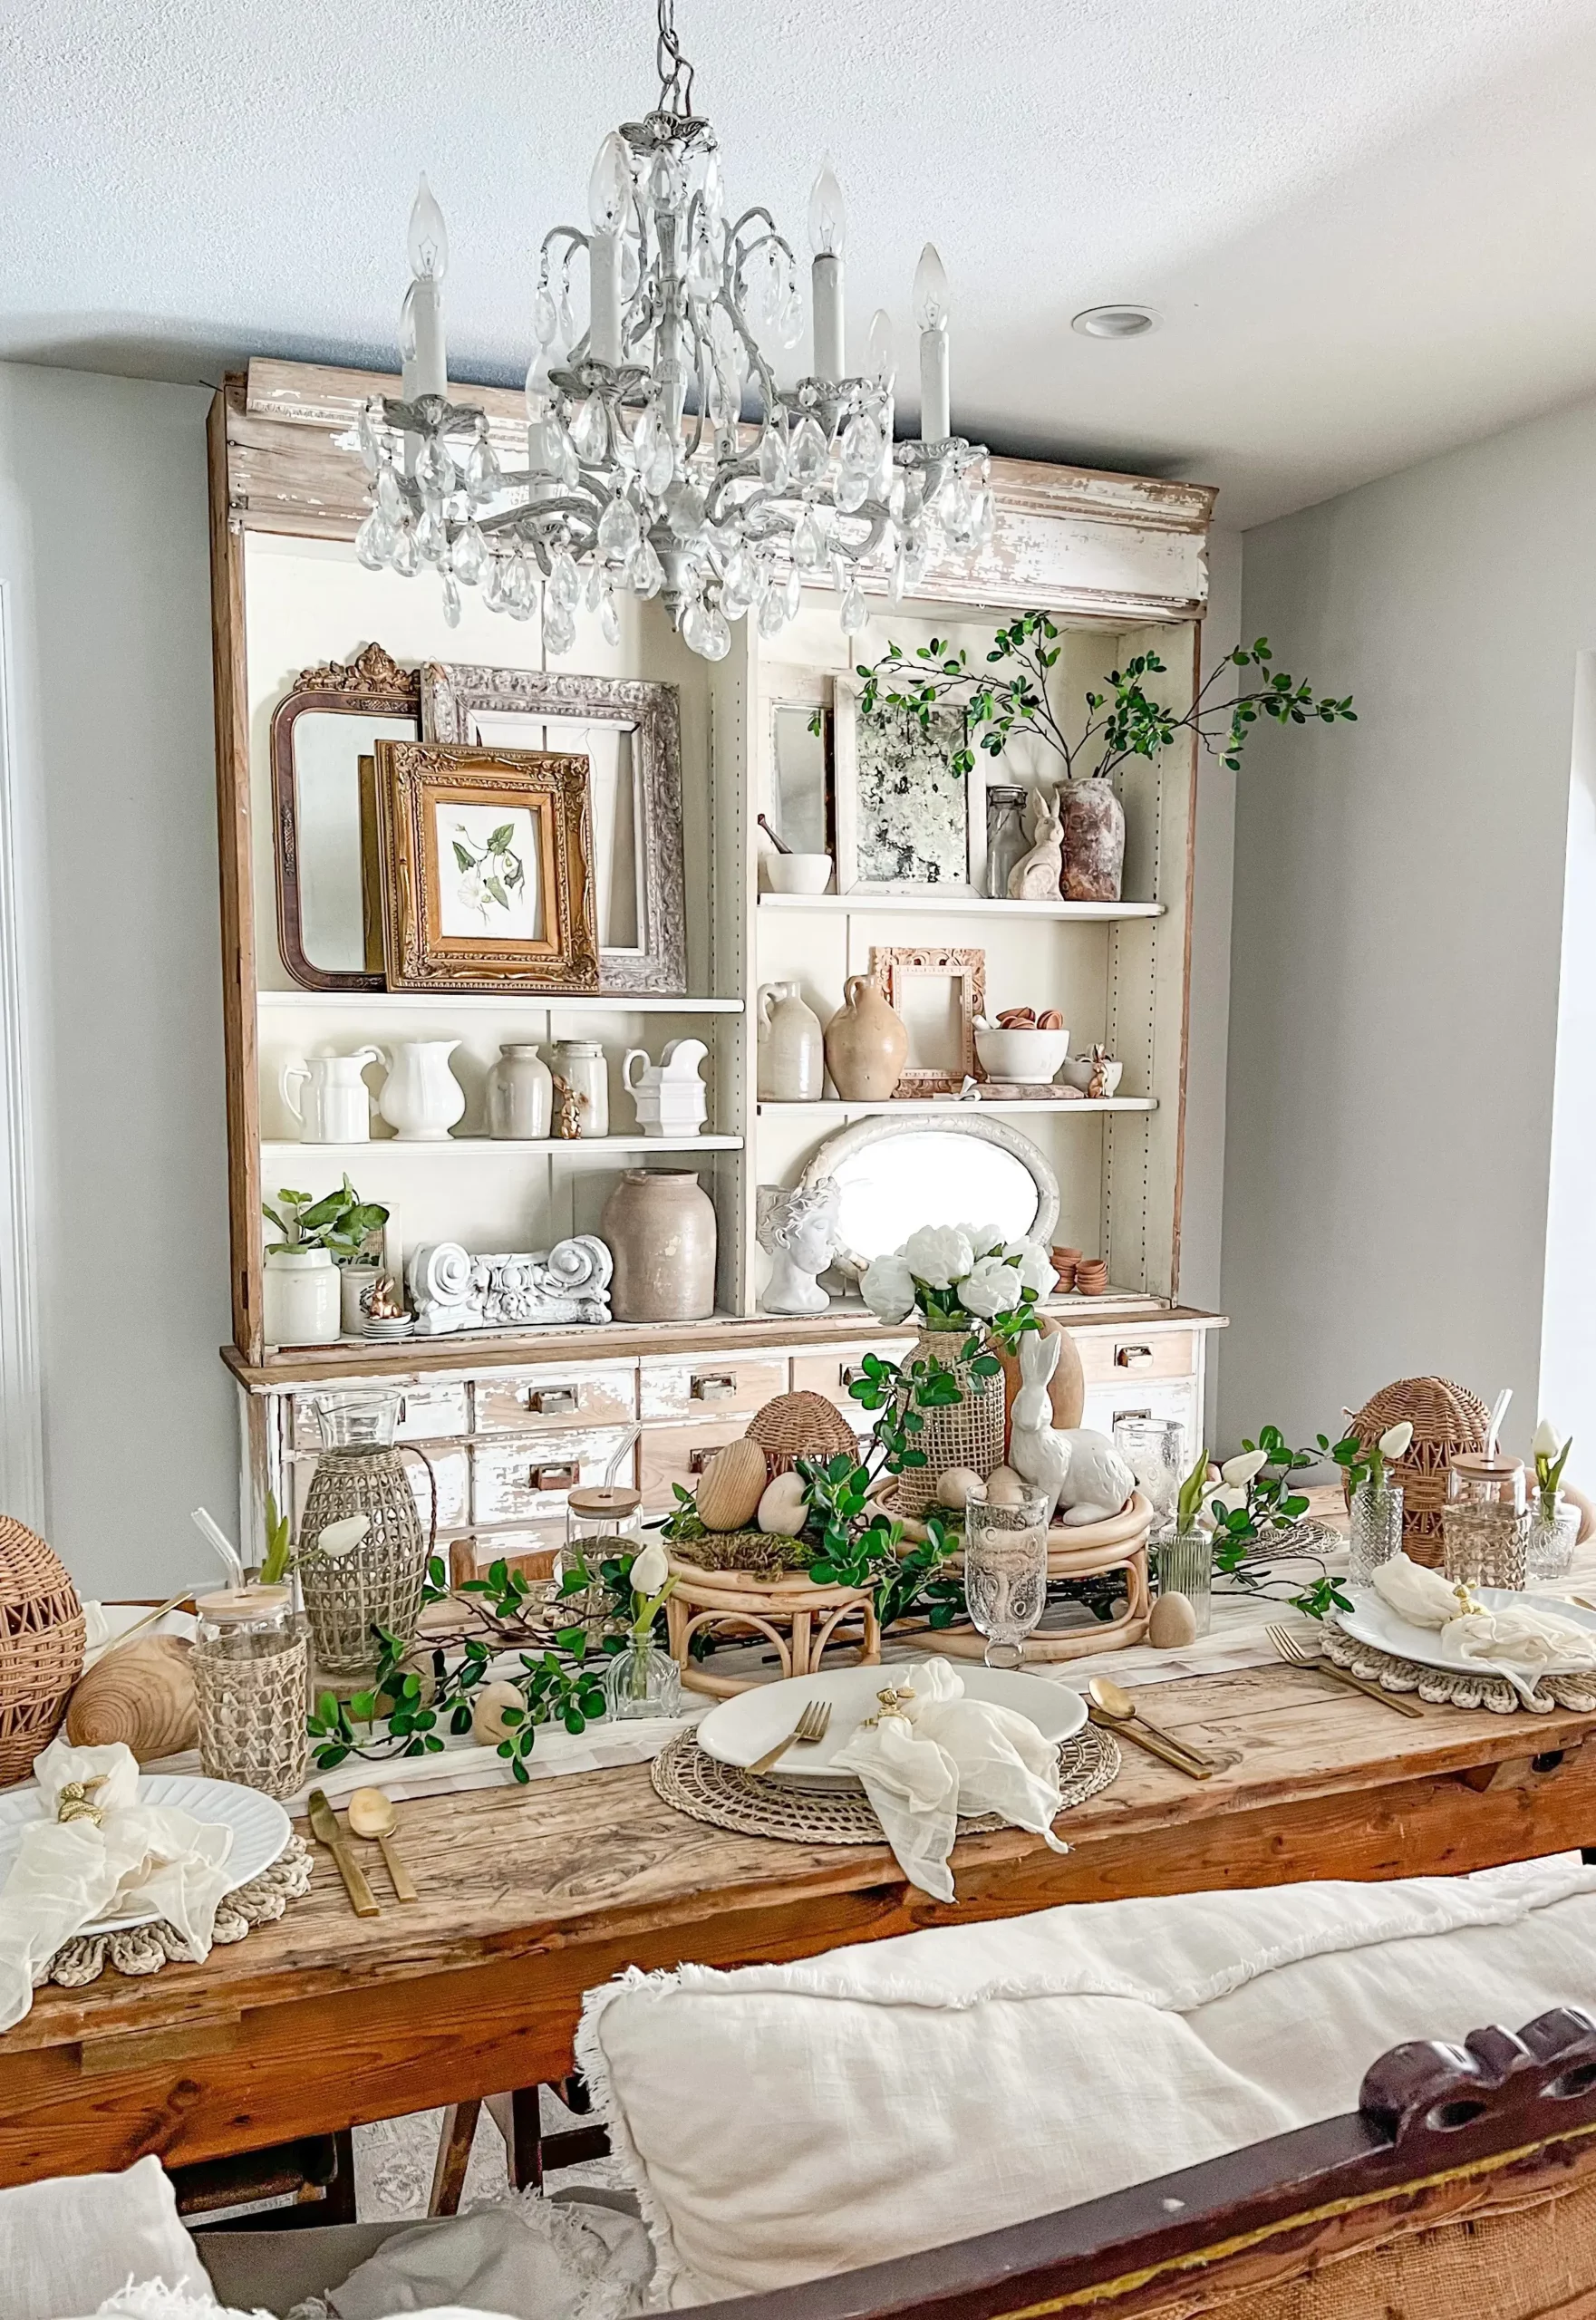 plants decorated throughout a dining room tablescape and a white apothecary with shelves styled for spring